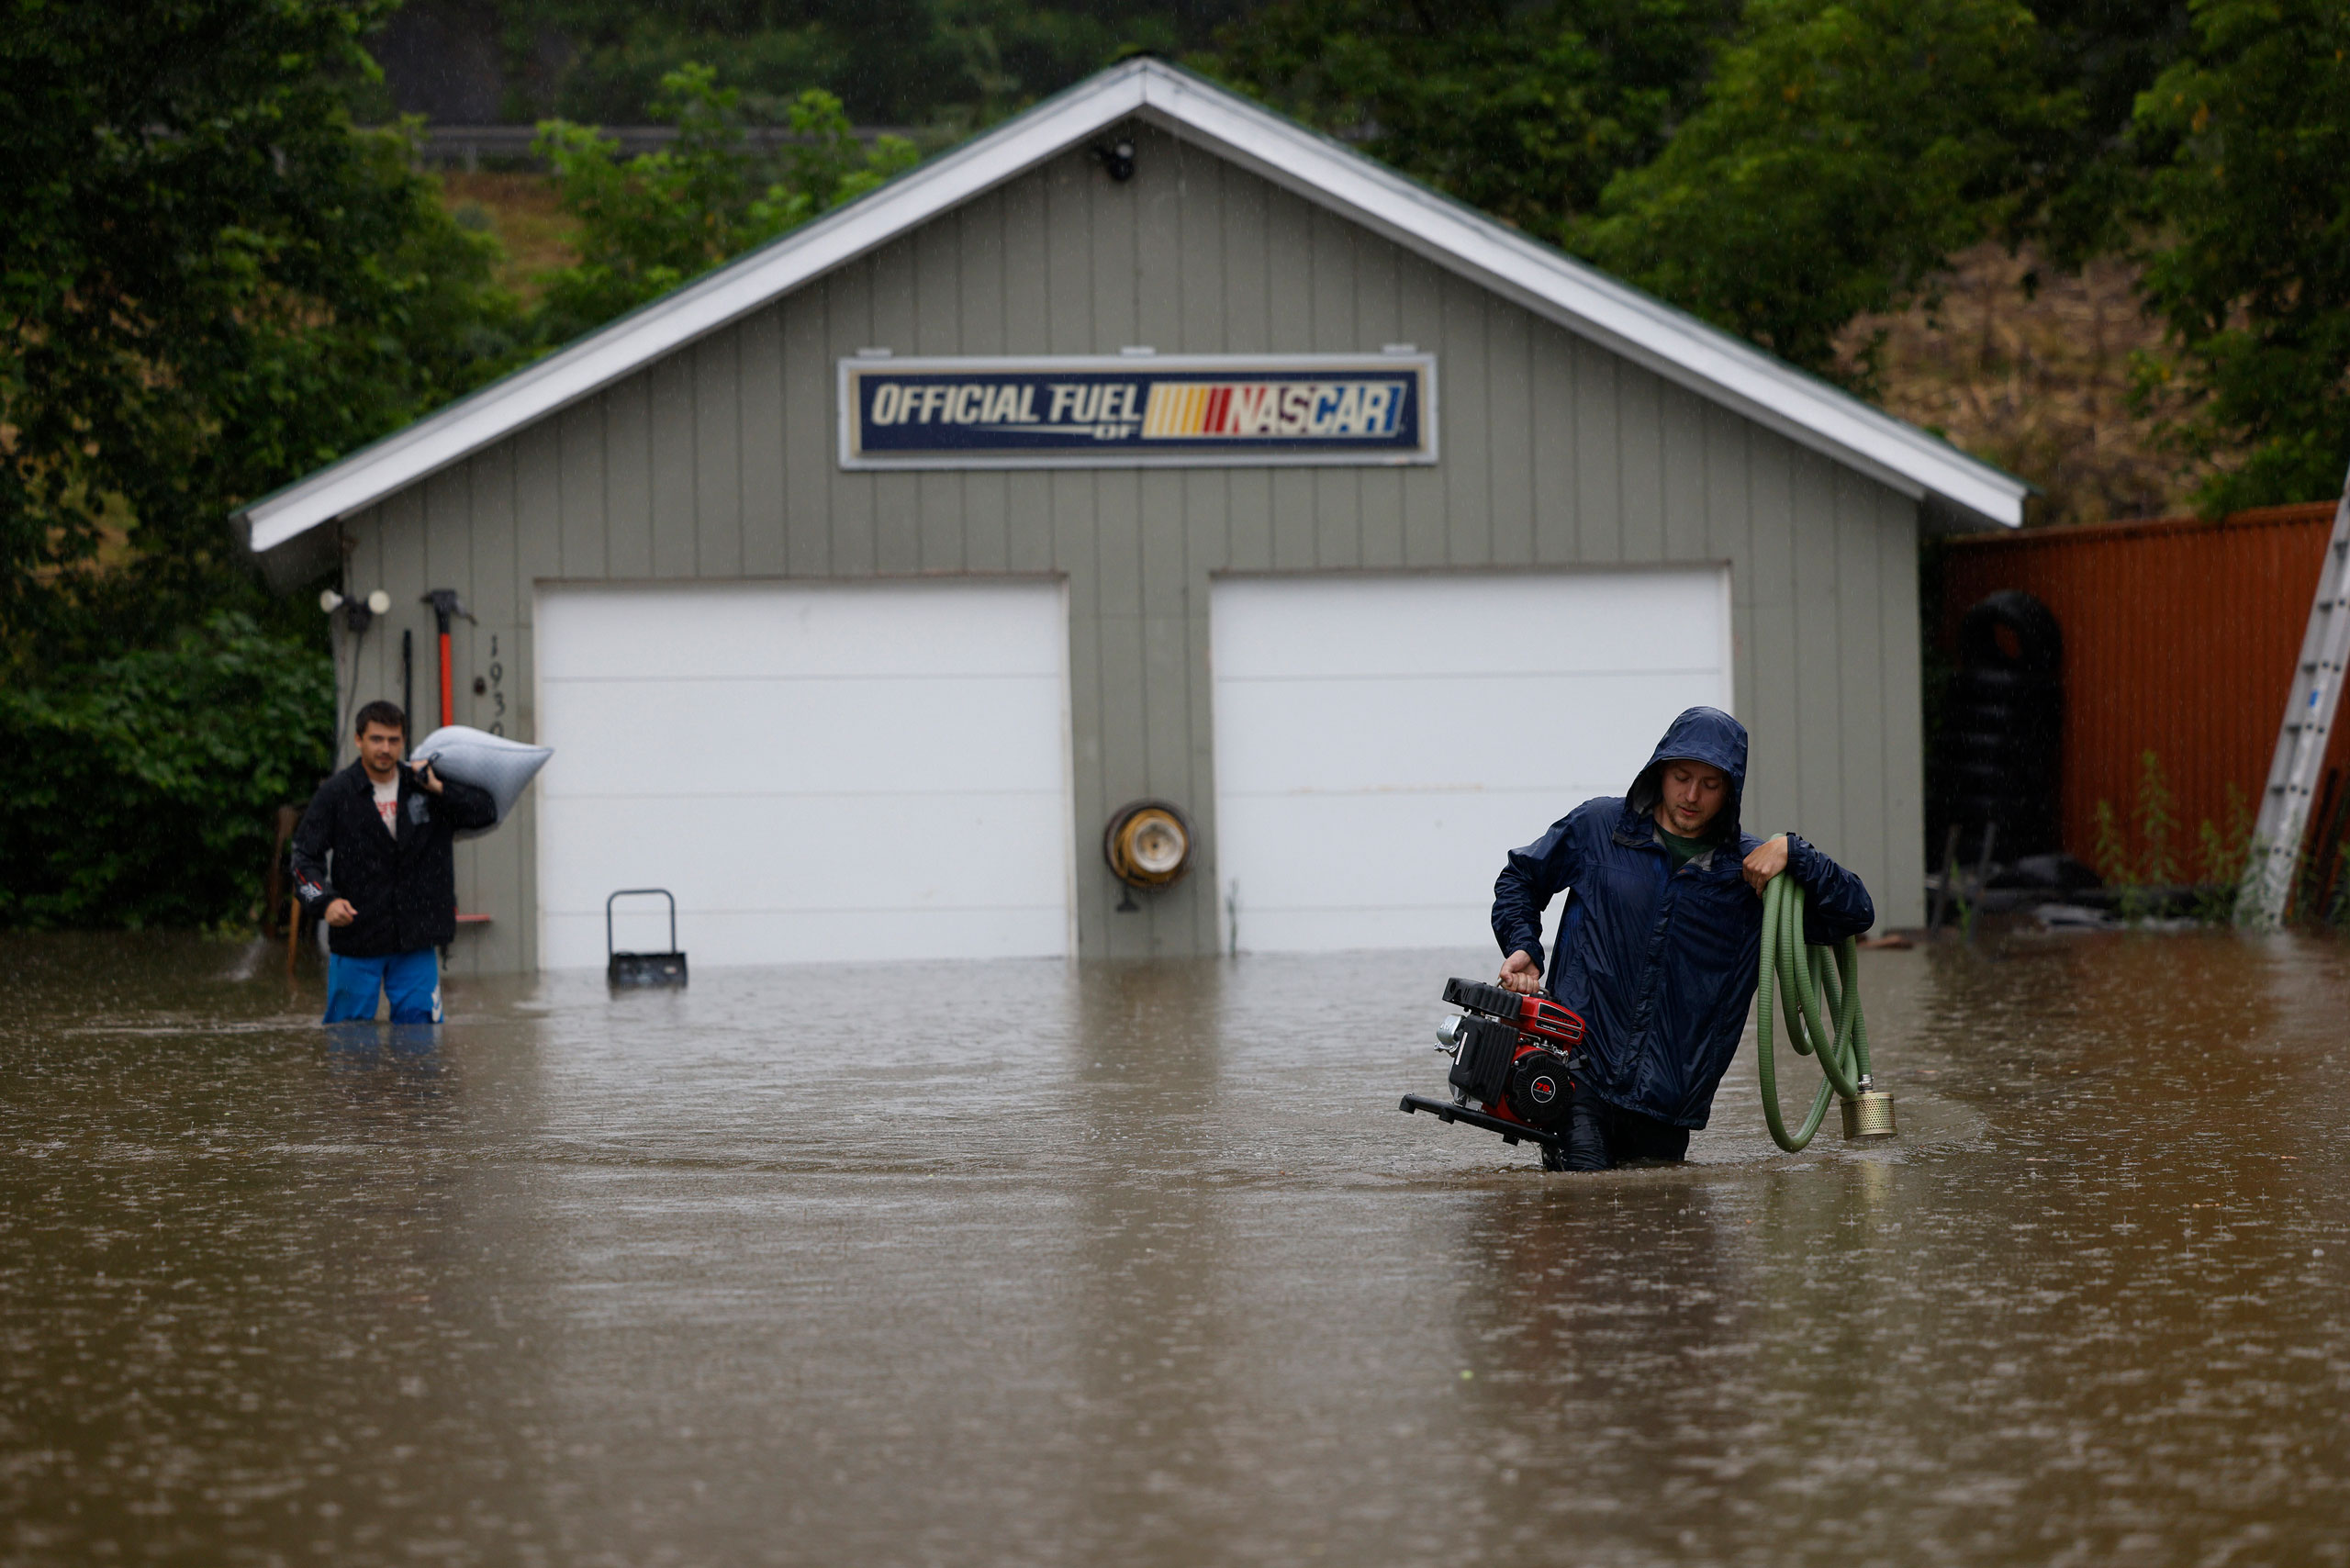 Residents remove their possessions from their home as floodwaters rise in Waterbury, Vt., on July 10. (Jessica Rinaldi—The Boston Globe/Getty Images)